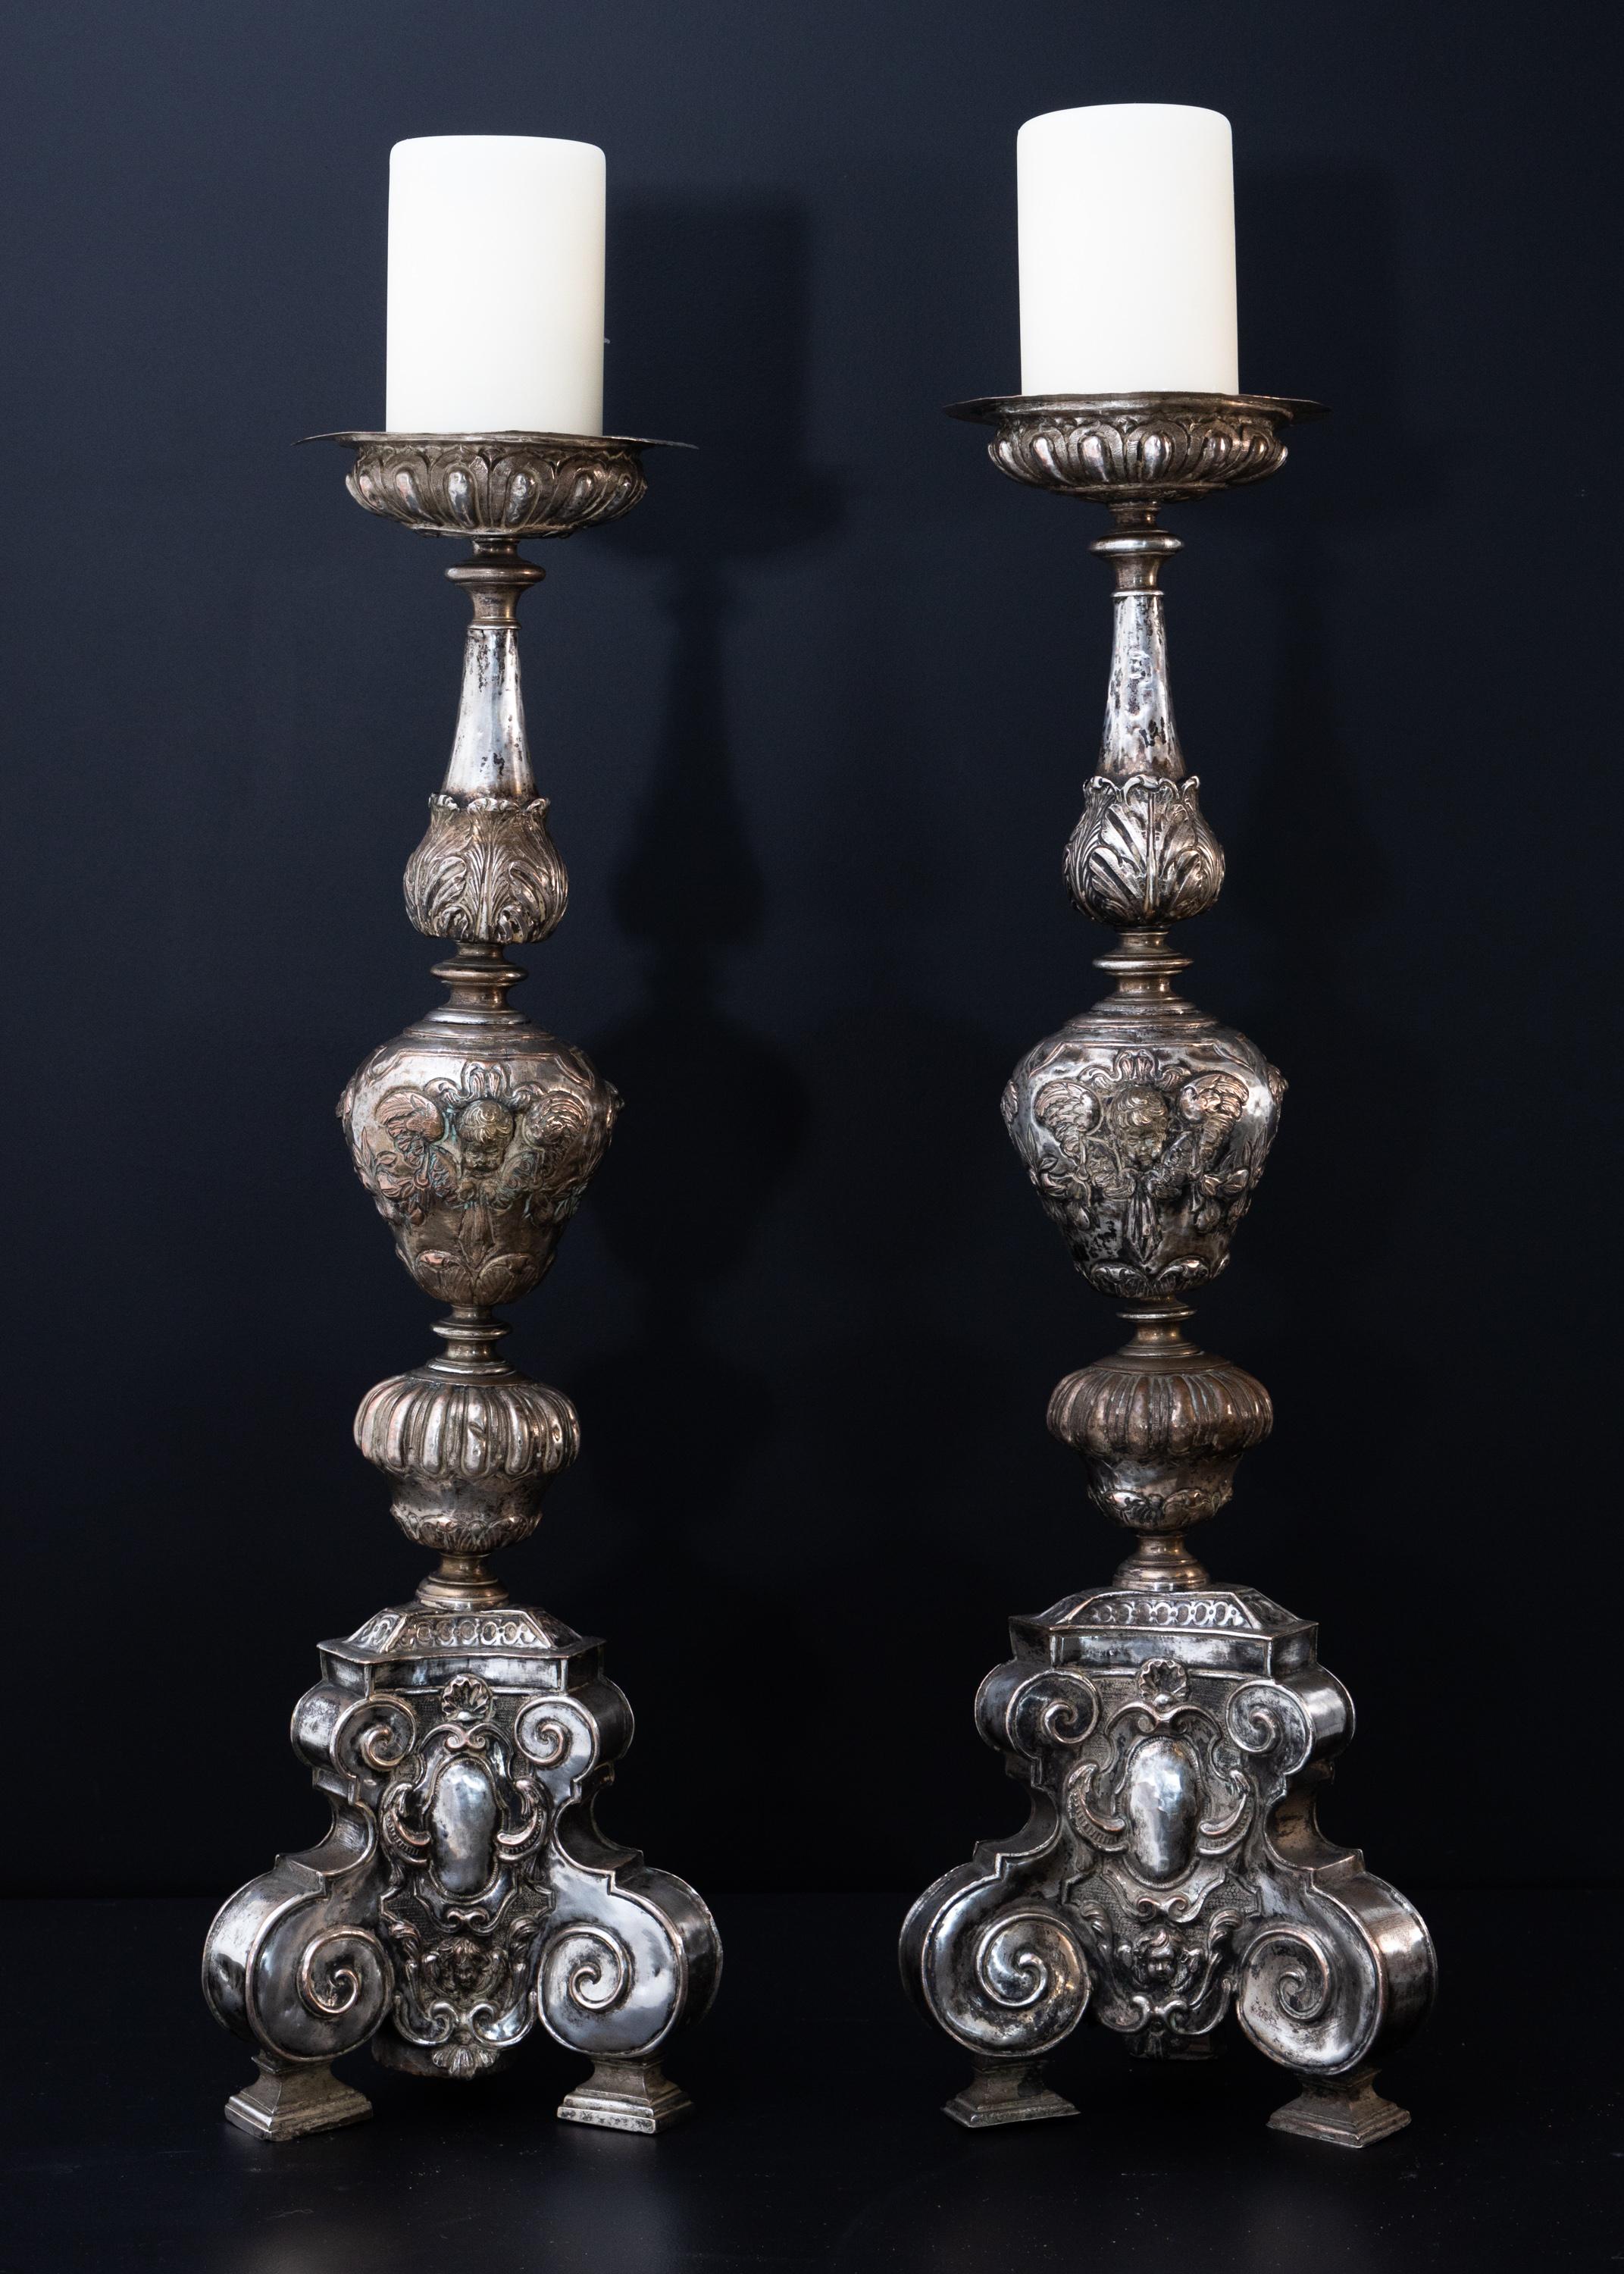 Pair of Silver-Plated Altar Candlesticks, Italy, 17th Century 5